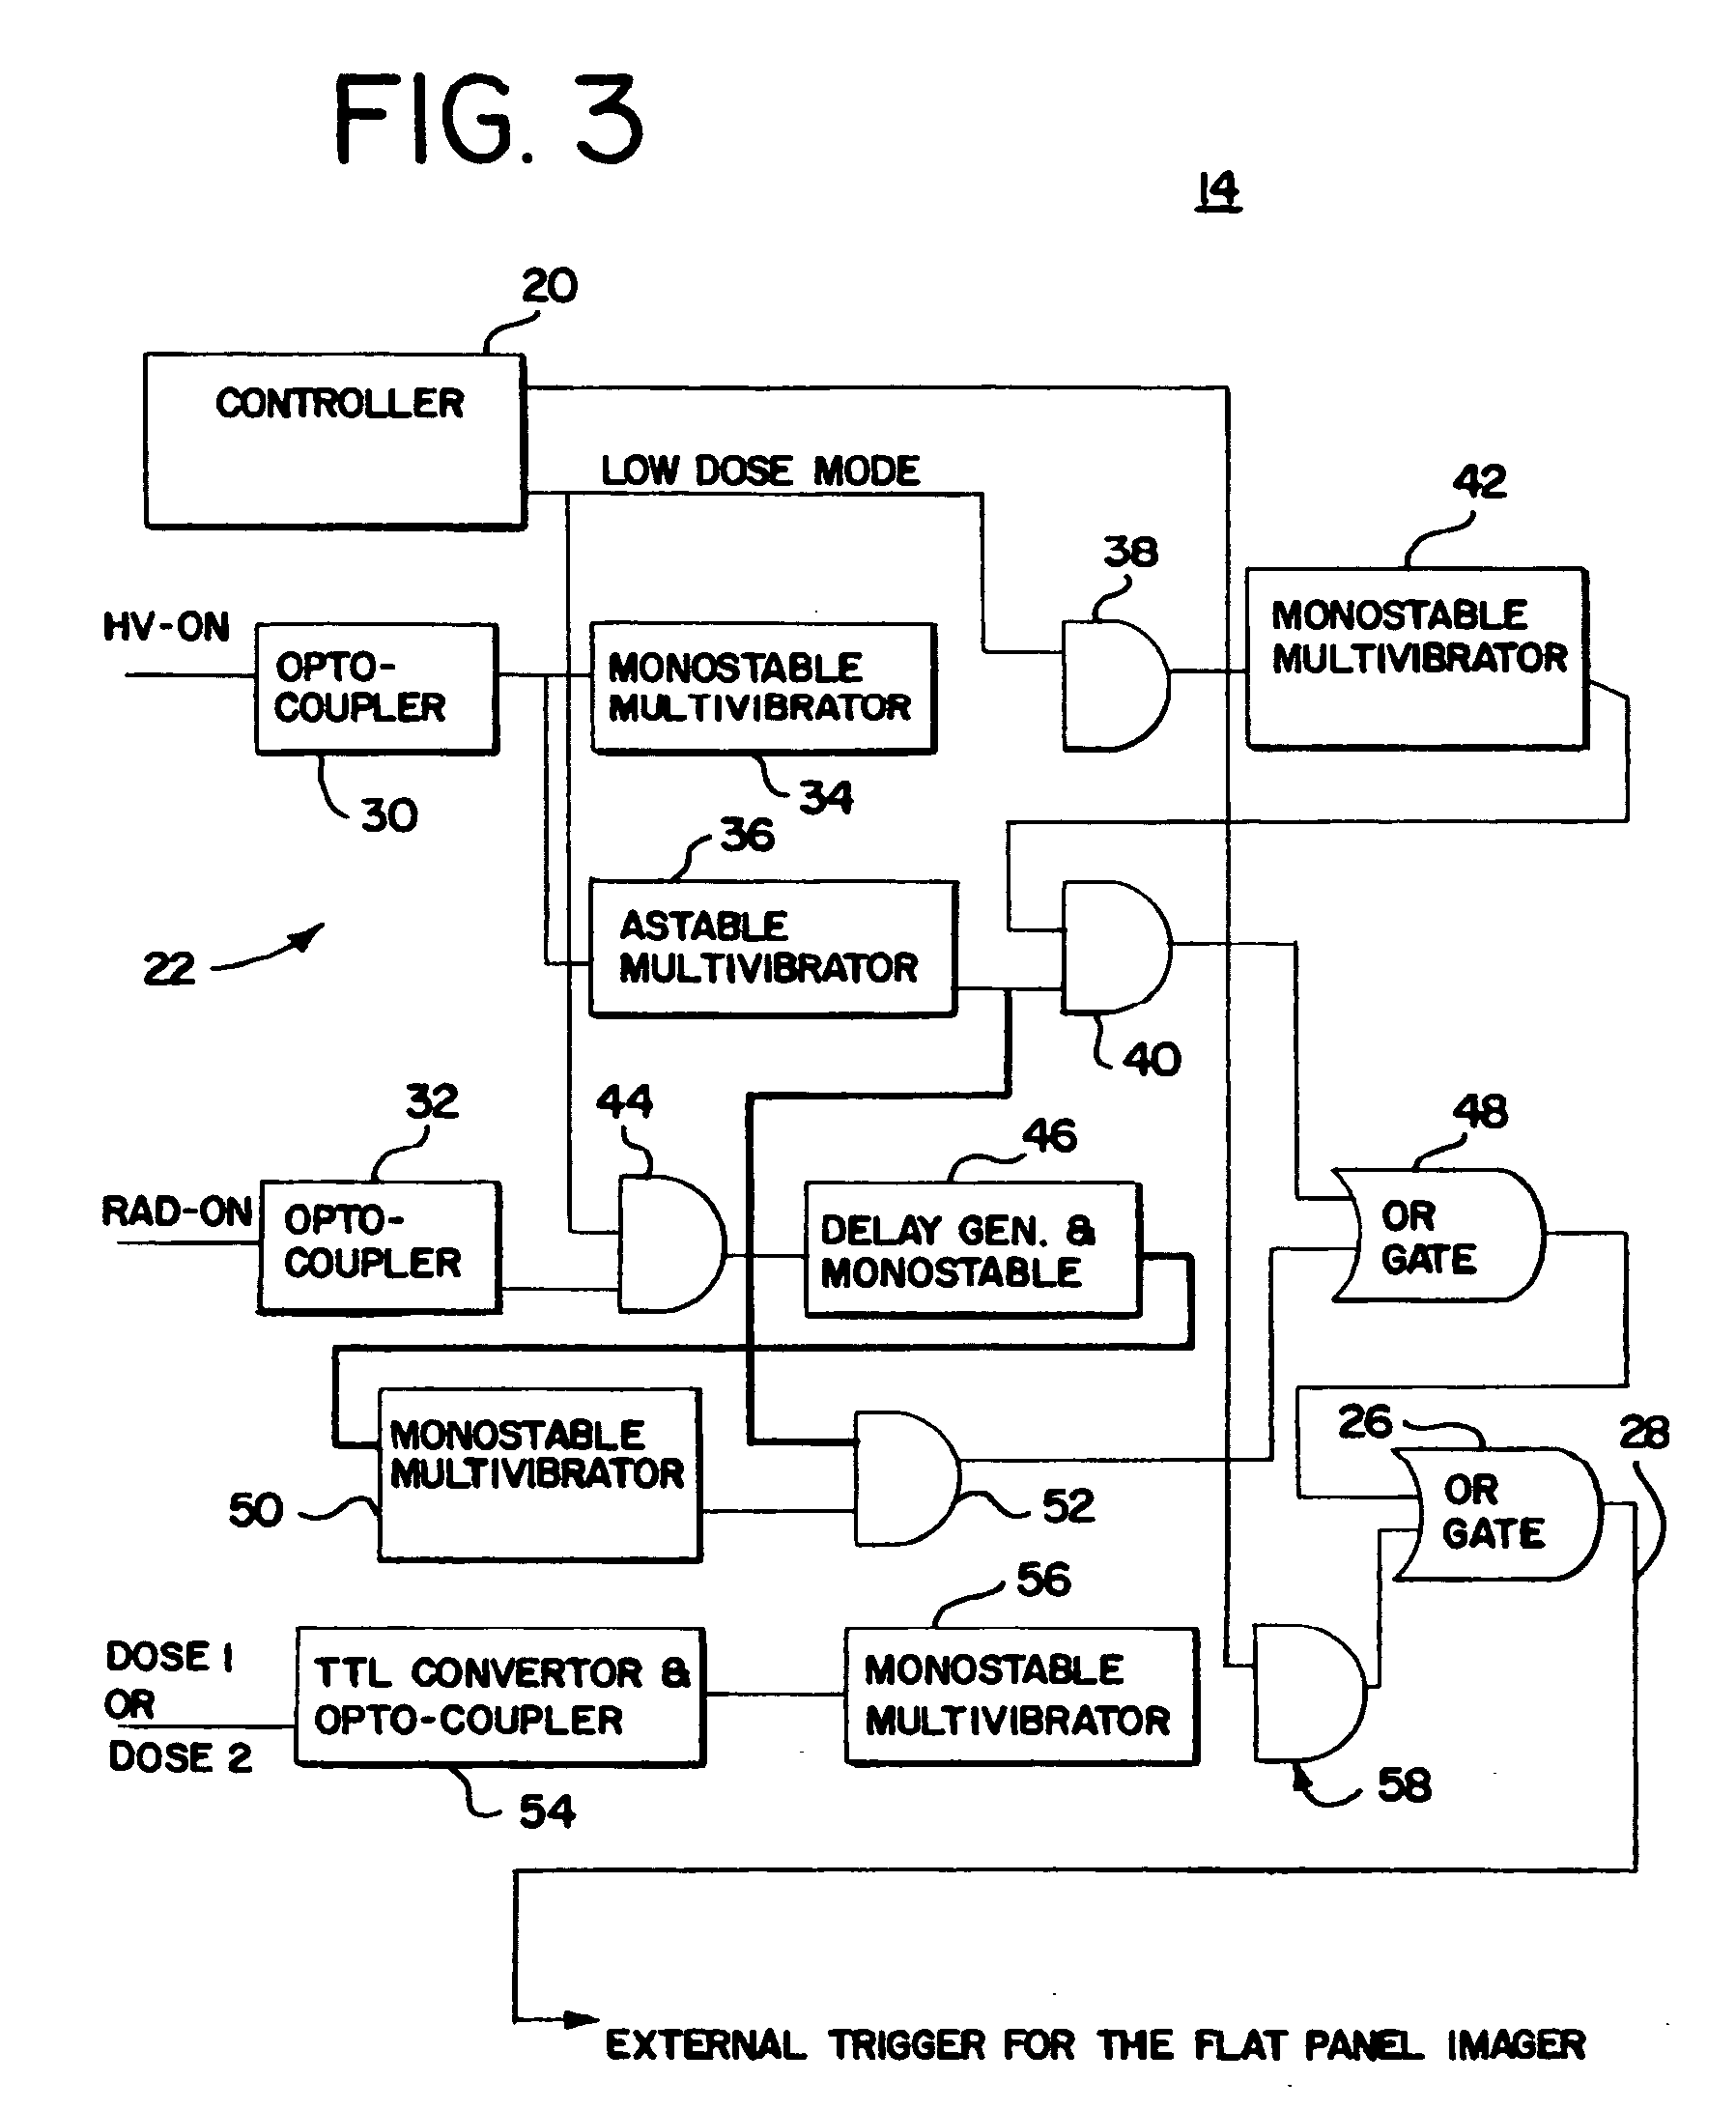 X-ray therapy electronic portal imaging system and method for artifact reduction